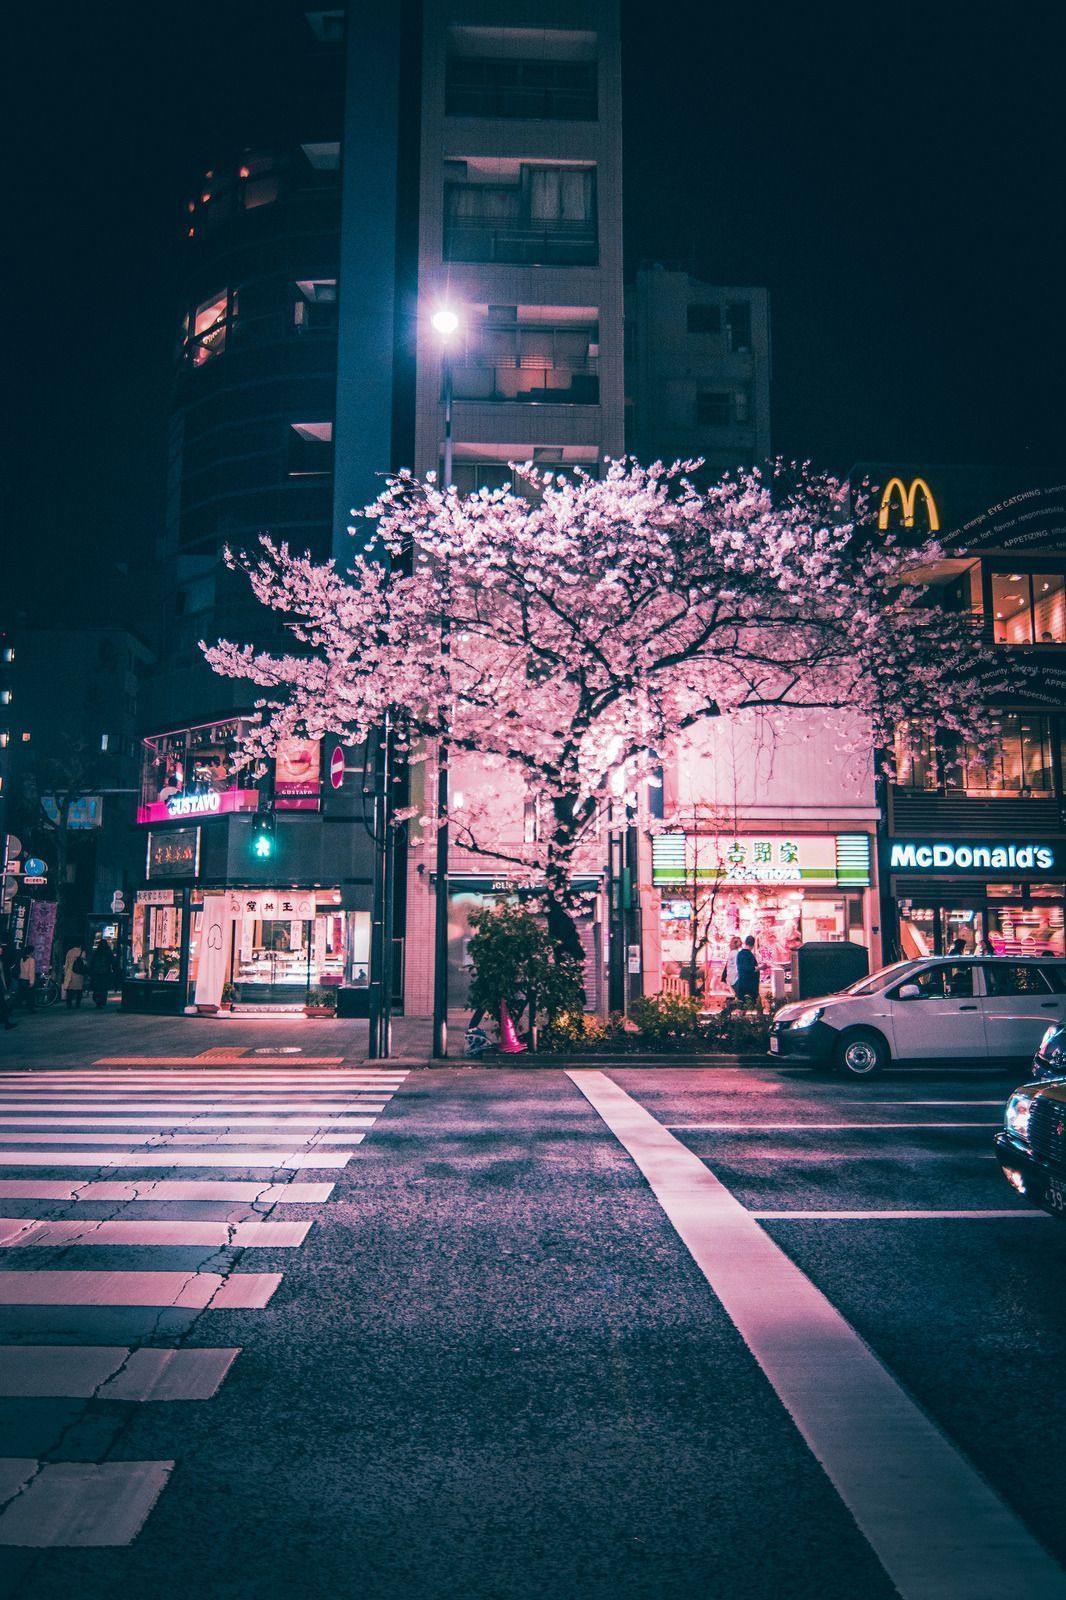 A street with cars and buildings at night - Tokyo, Japan, Japanese